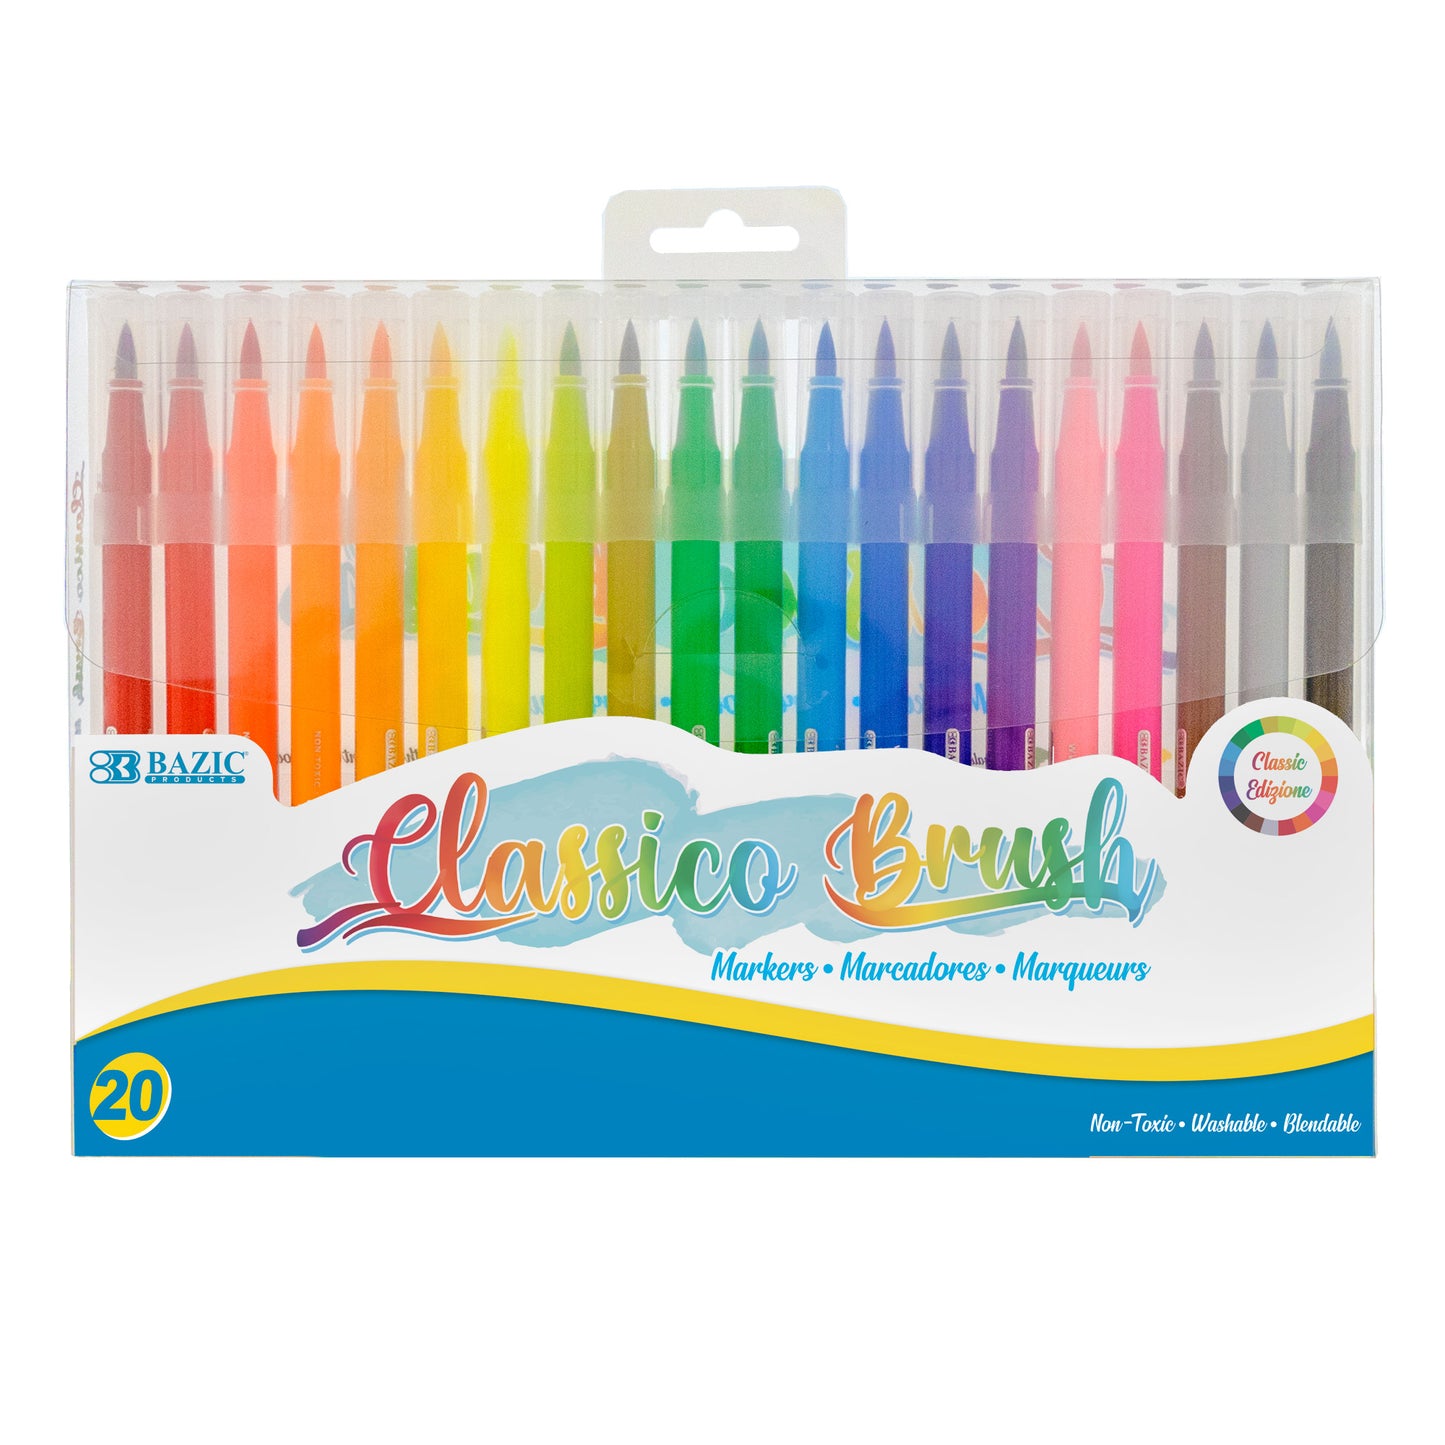 Washable Brush Markers, 20 Colors, 20 Per Pack, 3 Packs